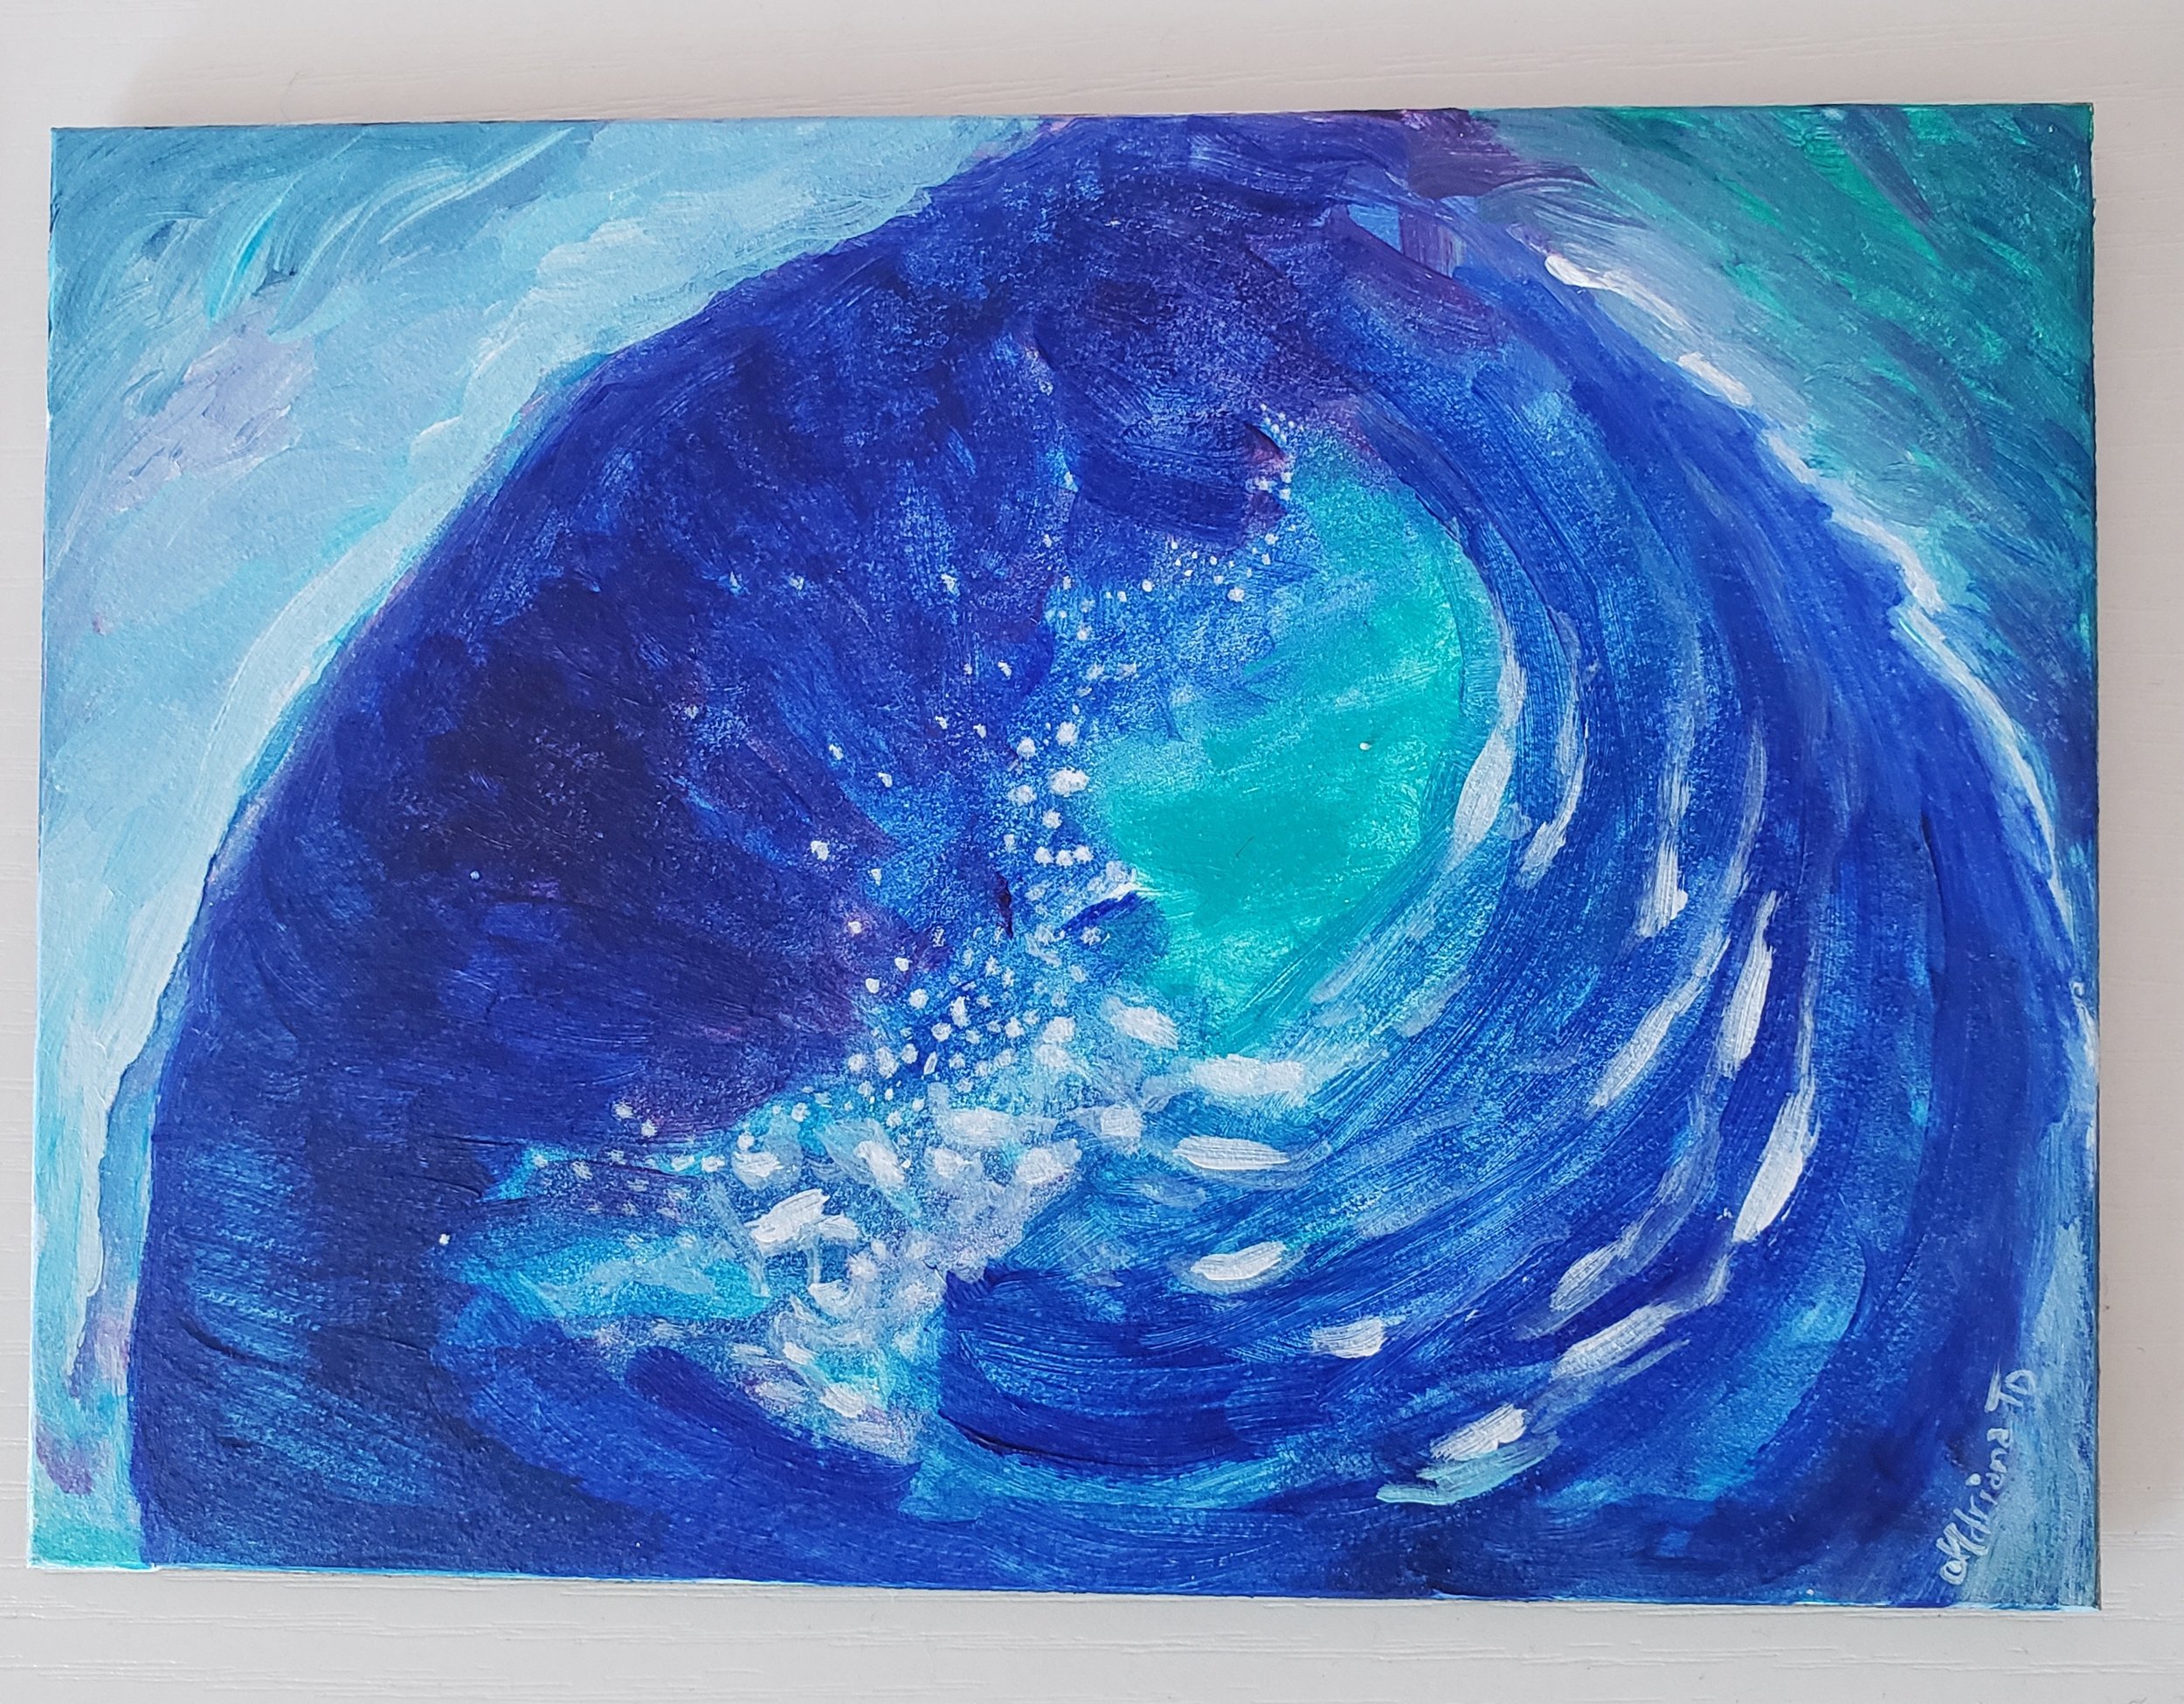 Water's Exhale - 5"x7" 